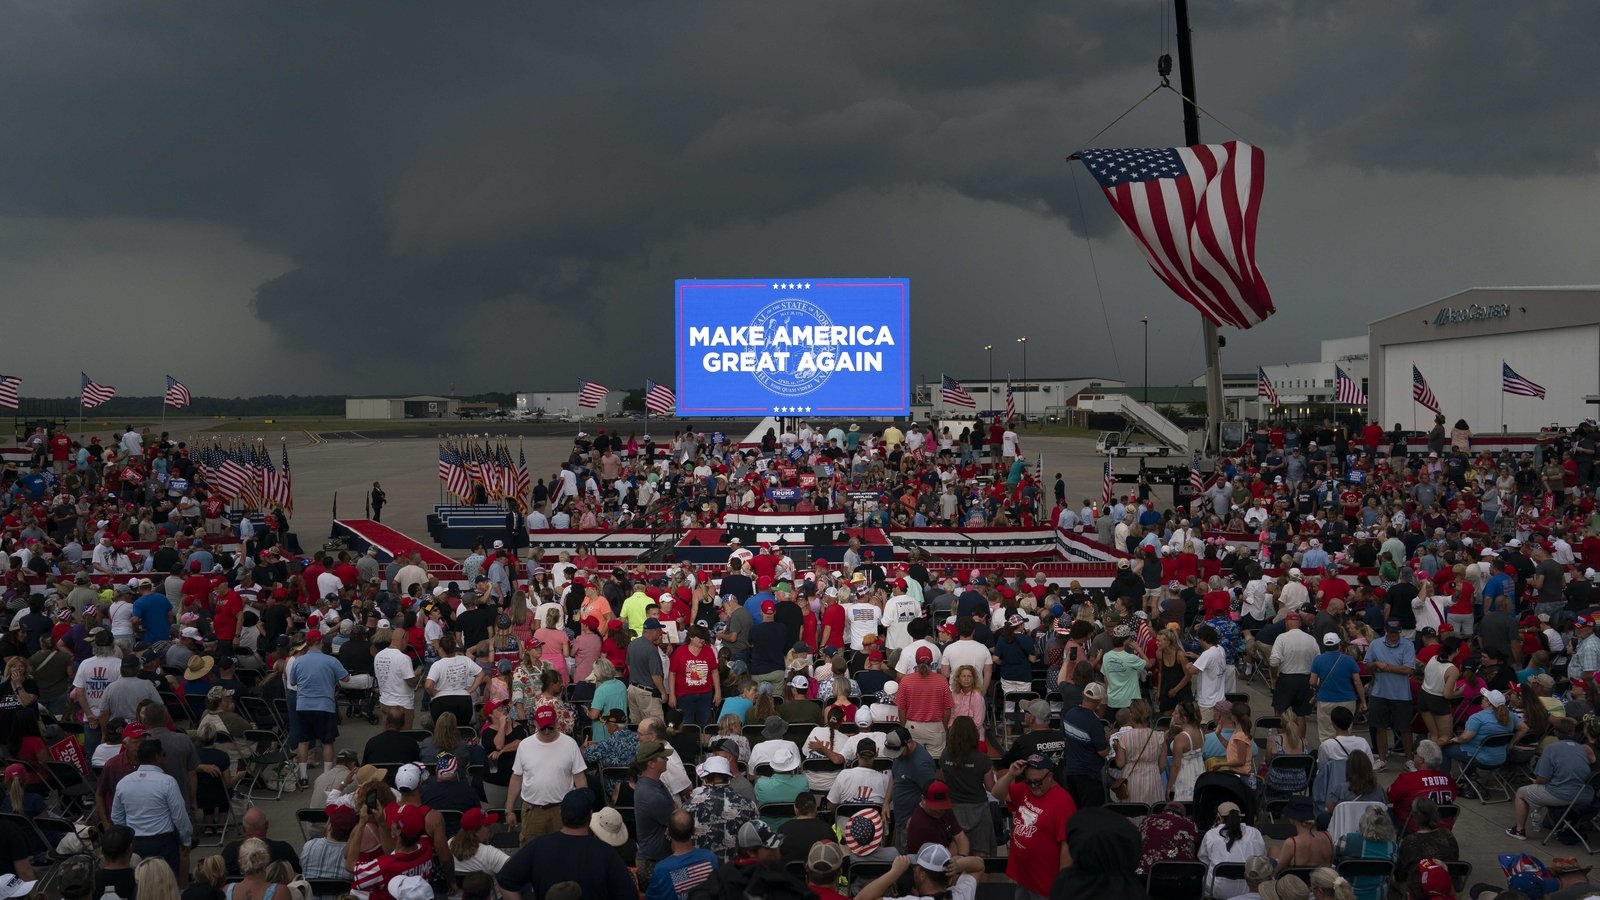  Bad weather forces Trump to postpone NC rally 